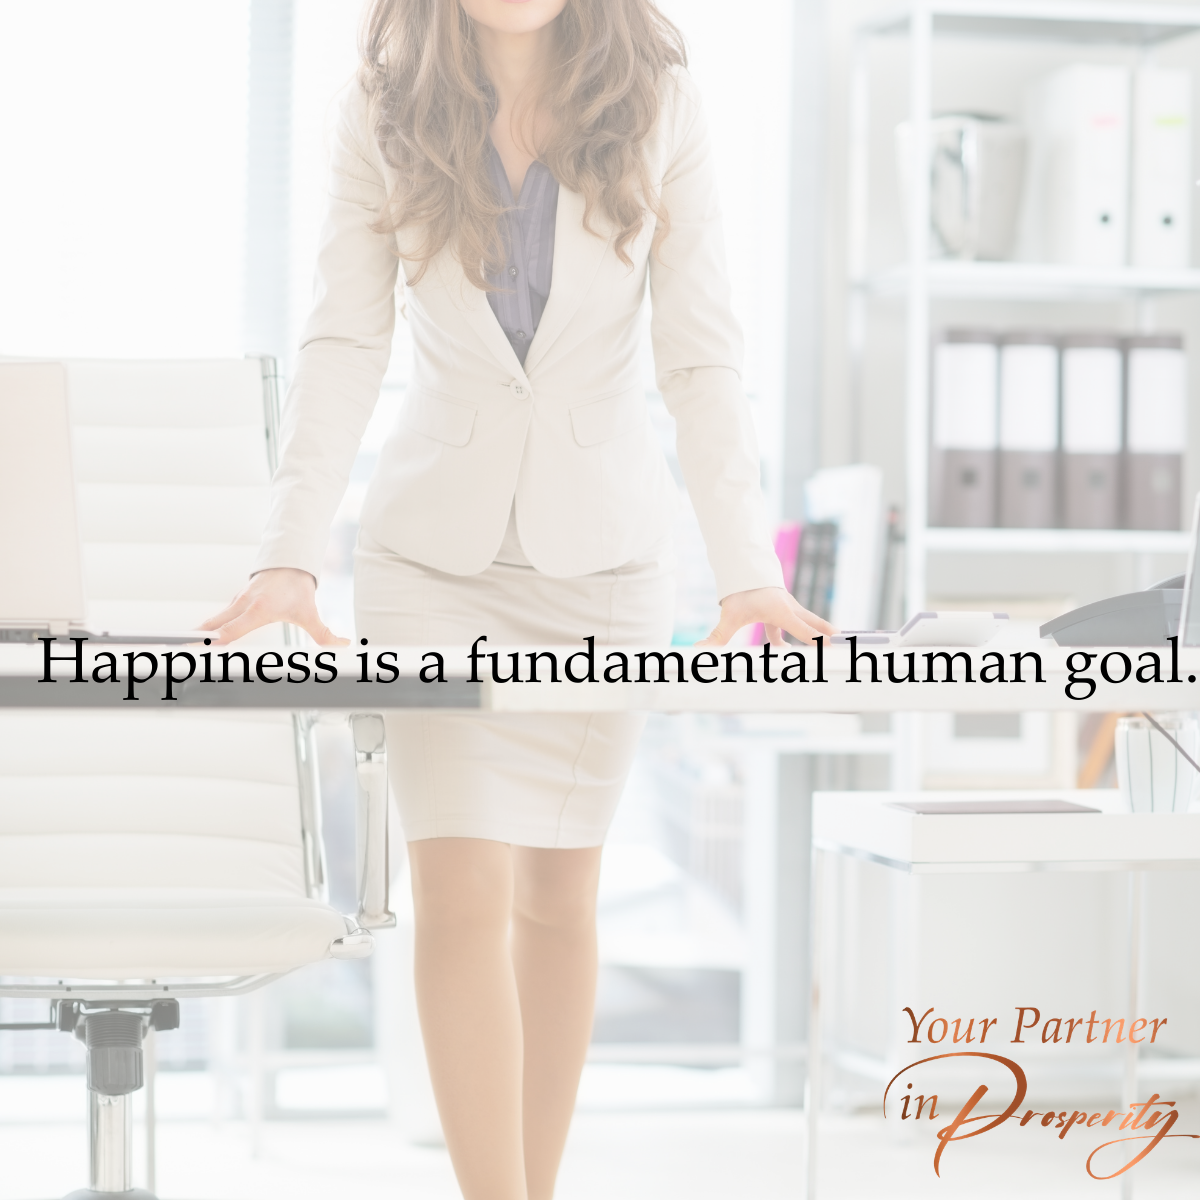 happiness is a fundamental human goal.